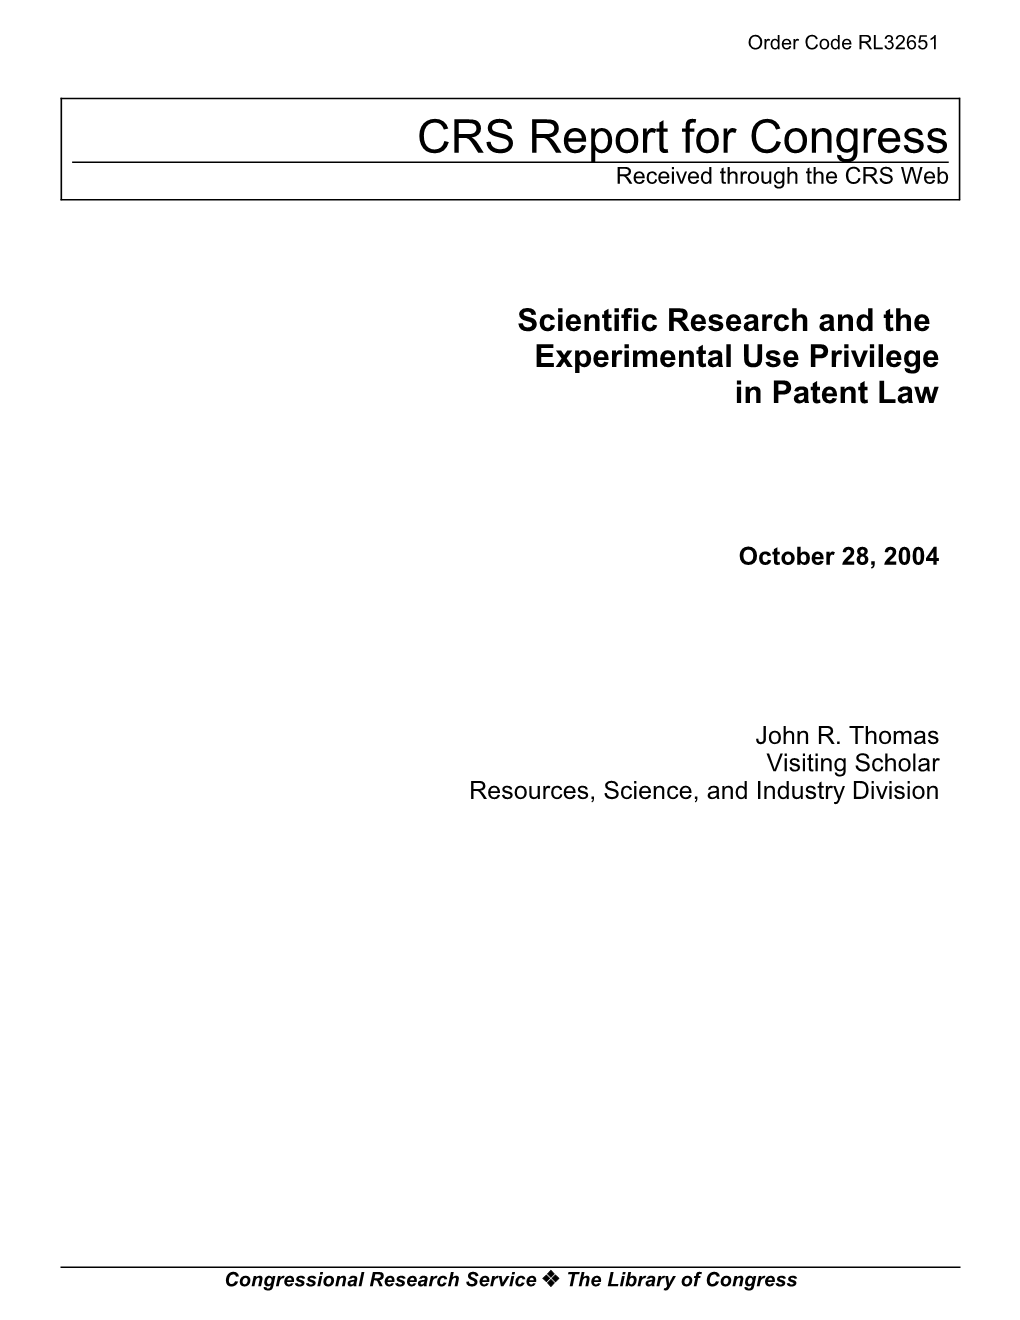 Scientific Research and the Experimental Use Privilege in Patent Law